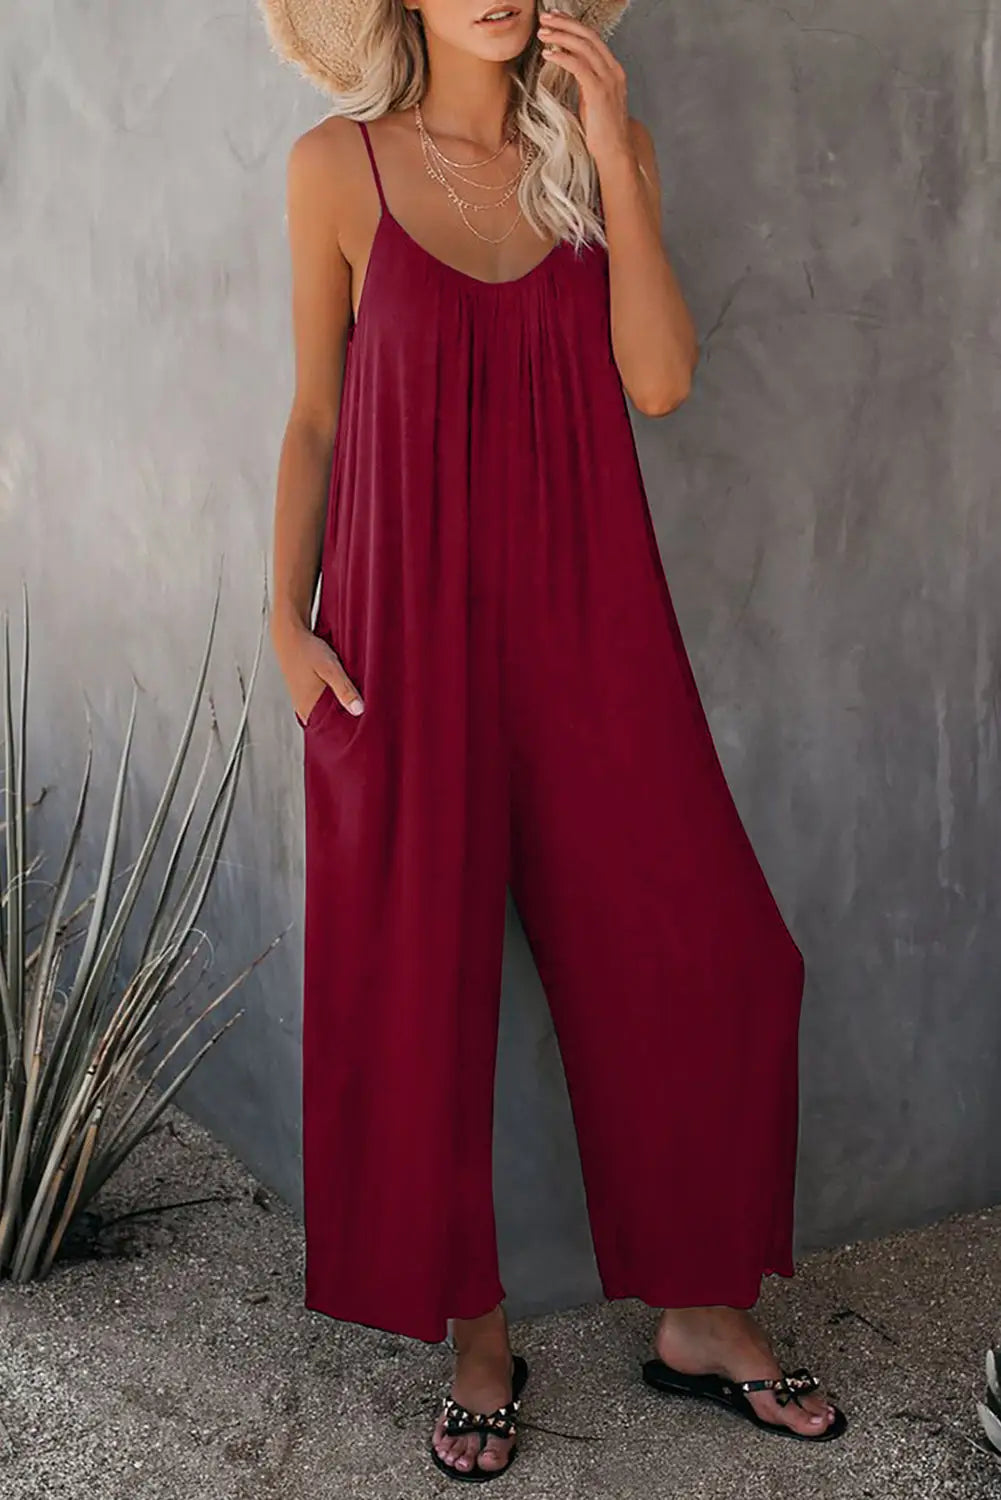 Pink red spaghetti straps wide leg pocketed jumpsuits - & rompers